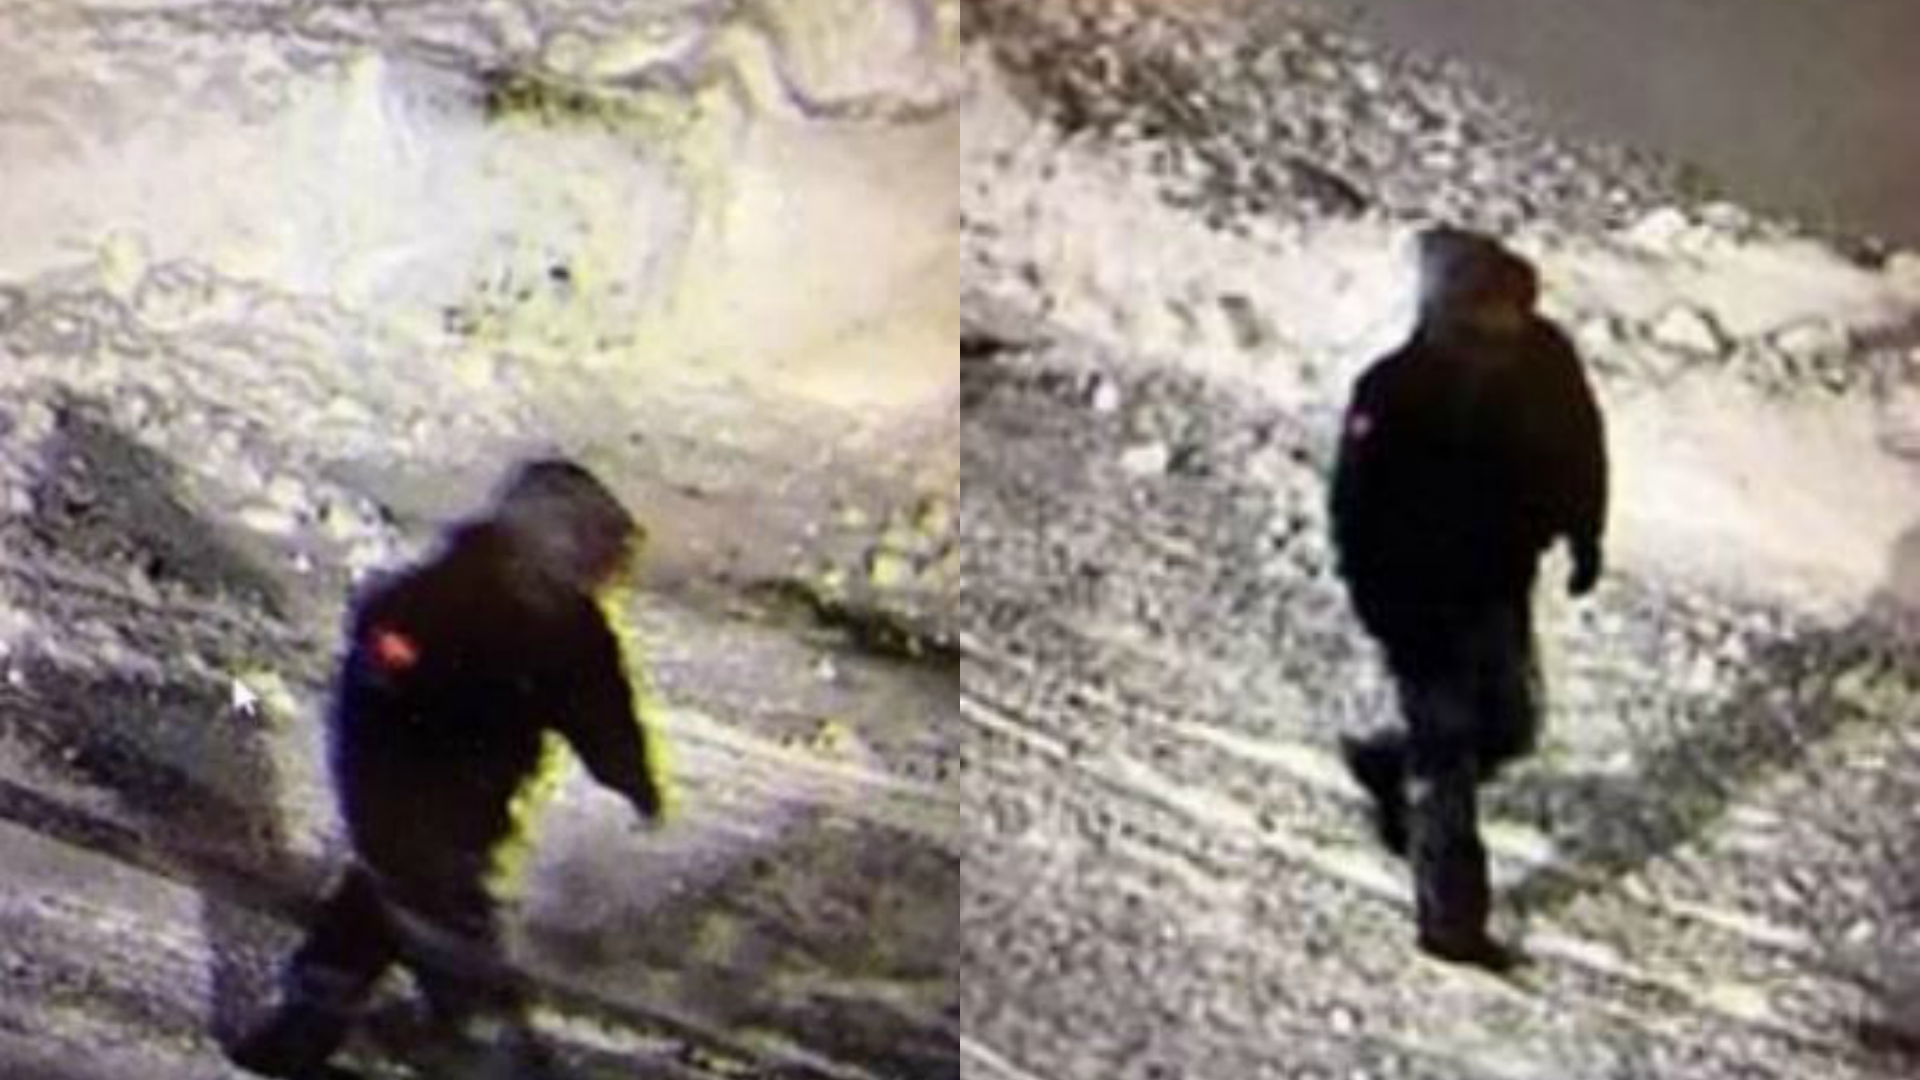 Police in Wyoming have release two photos of a person of interest related to a deadly shooting earlier this month.